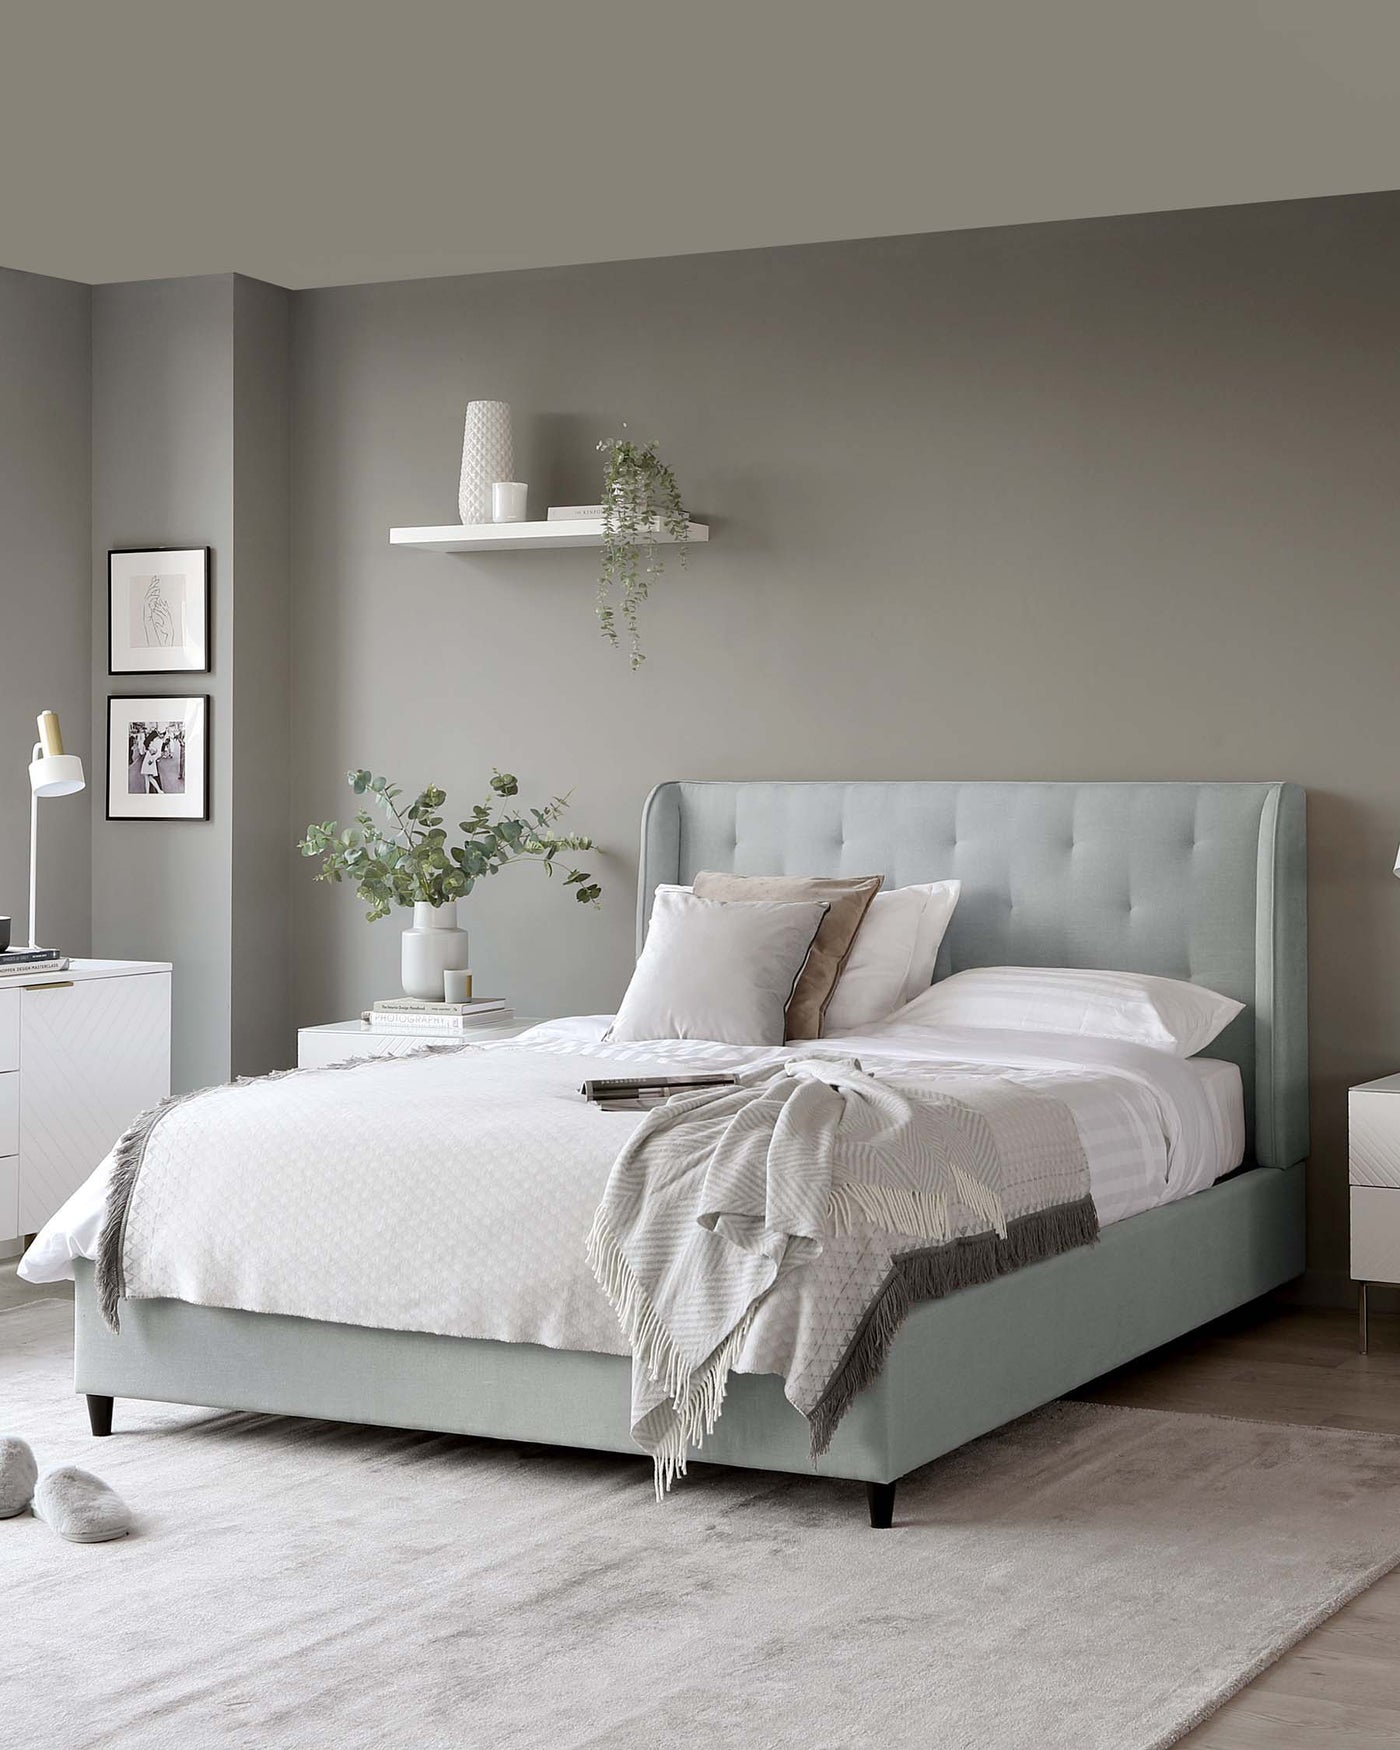 Contemporary bedroom furniture featuring an upholstered queen-size platform bed with a high, tufted headboard in a soft pastel green; matching white bedside tables with a minimalist, modern design; a sleek, white floating wall shelf above the bed displaying decorative items; and a sparse white floor lamp. The ensemble is complemented by soft, neutral bedding and throw blanket, creating a serene and sophisticated space.